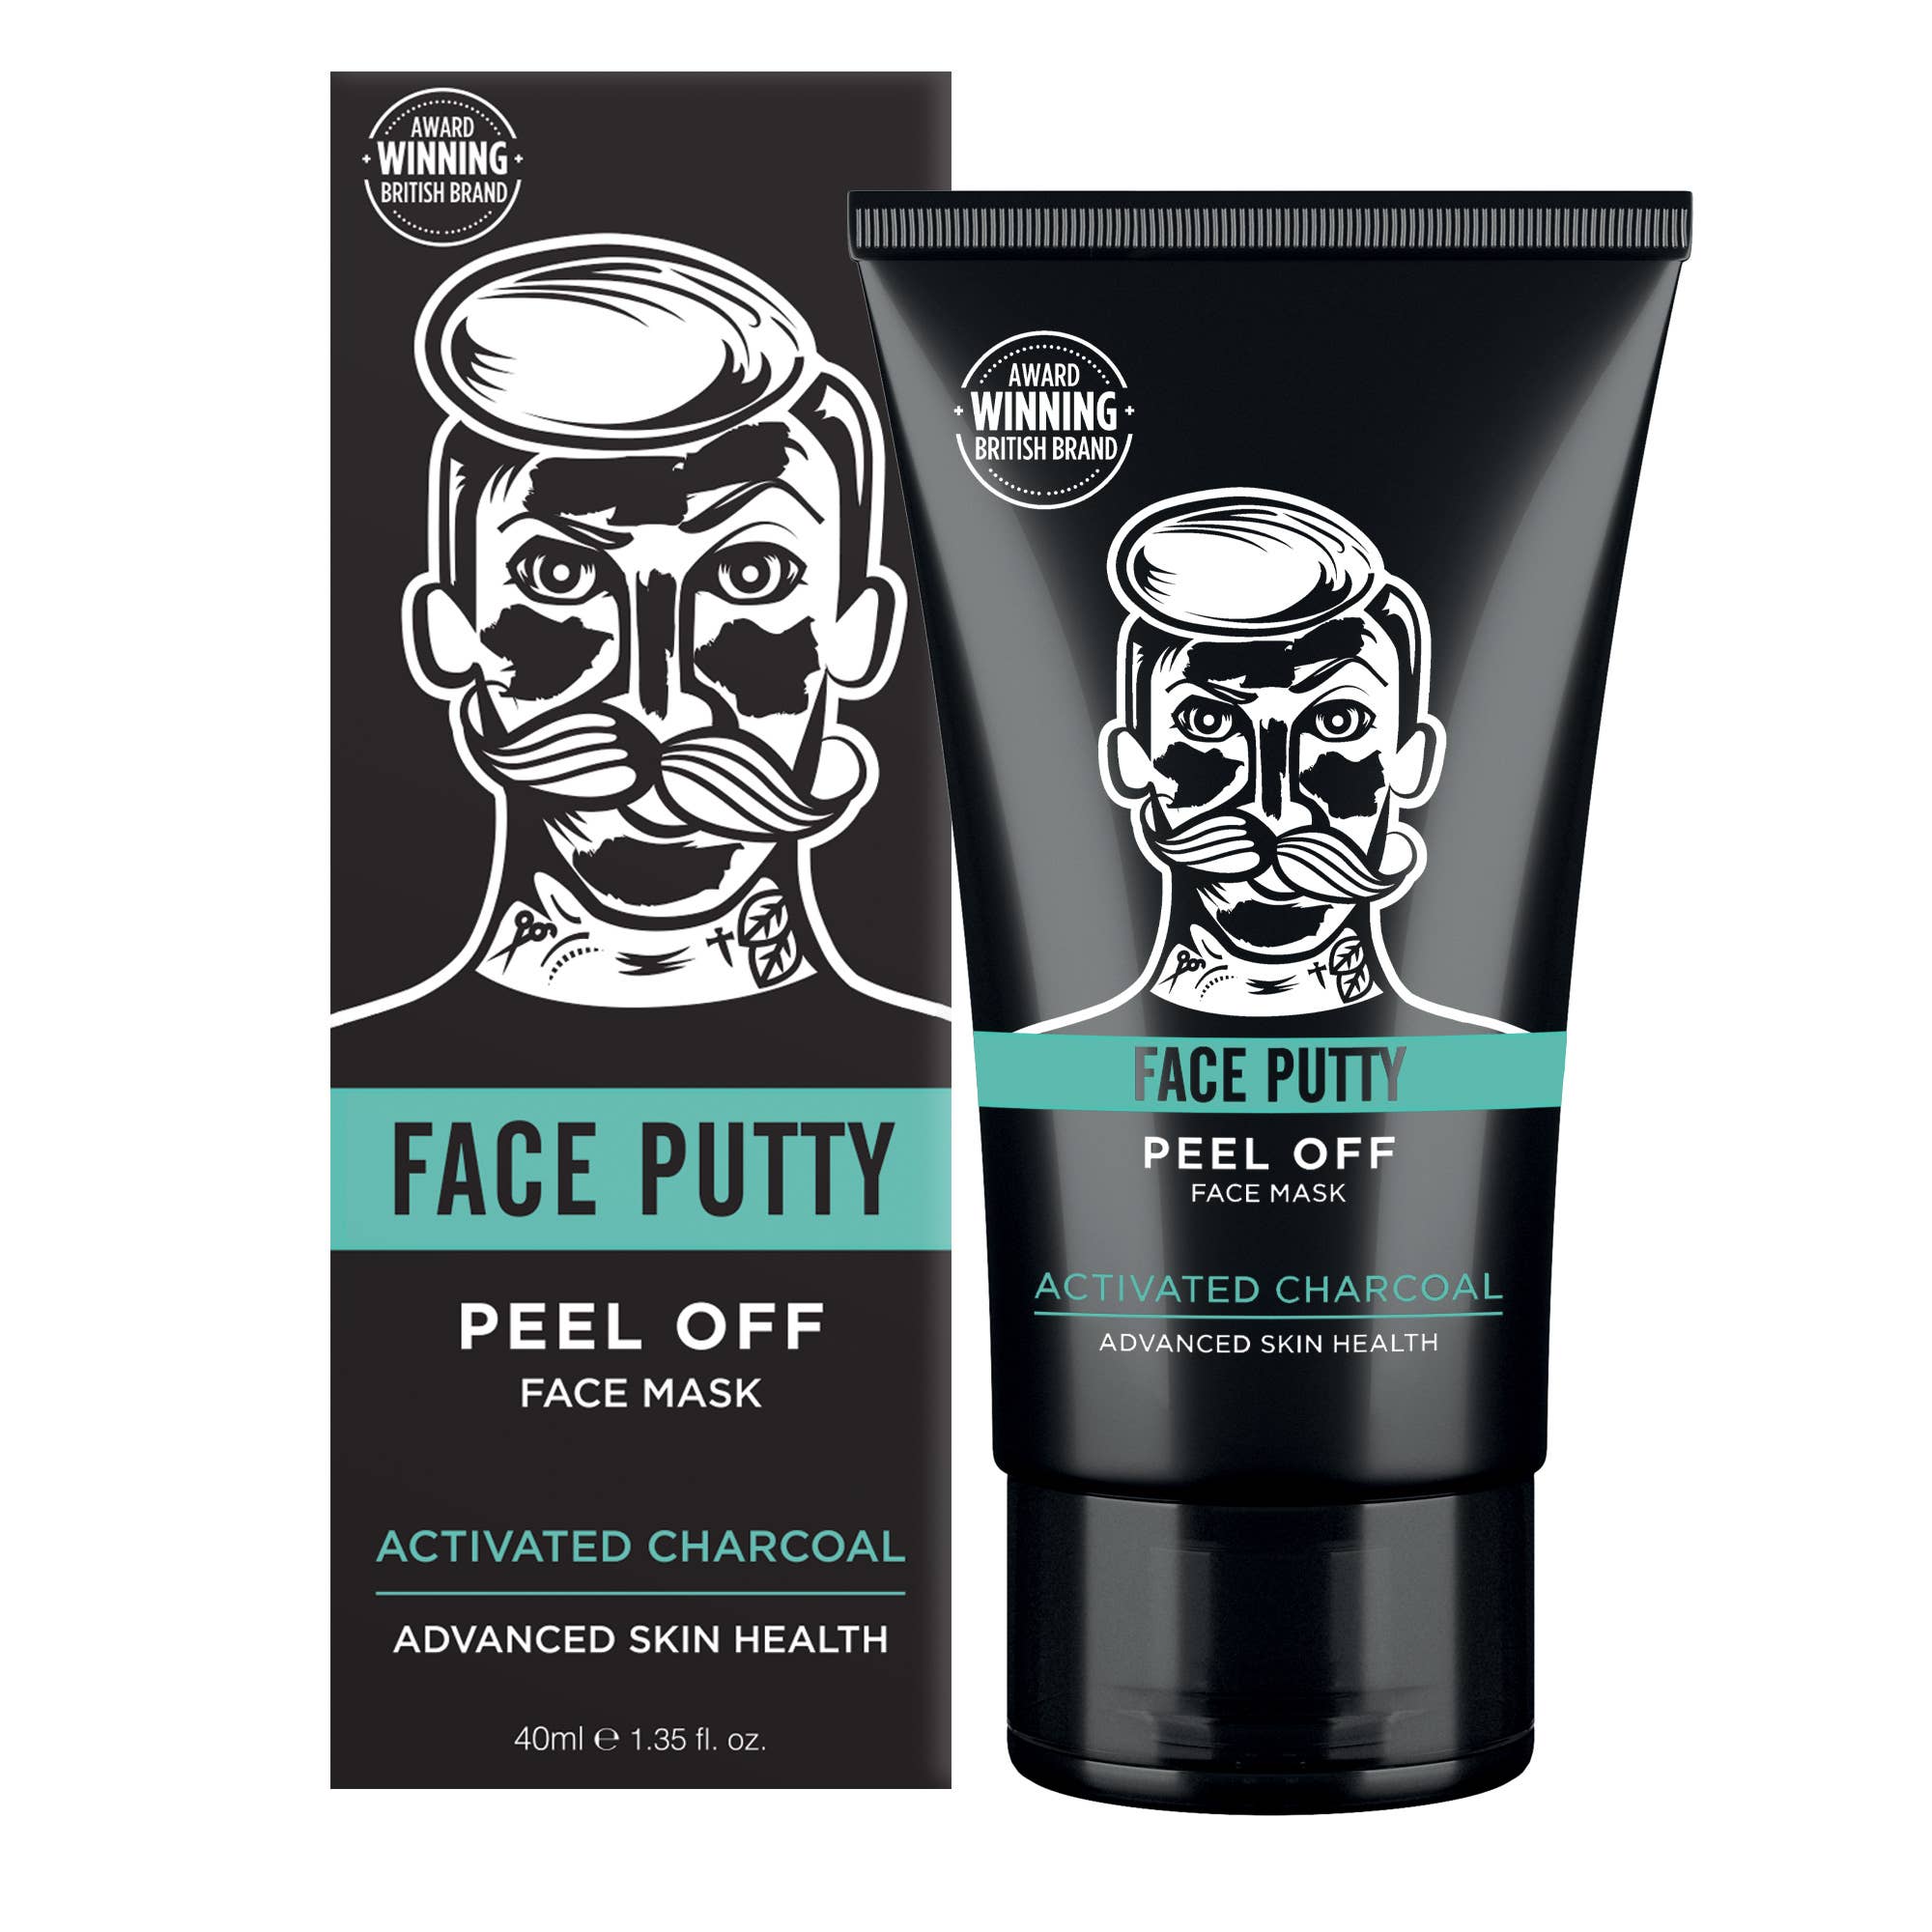 BARBER PRO - BARBER PRO Face Putty Peel-Off Mask 40ml Tube